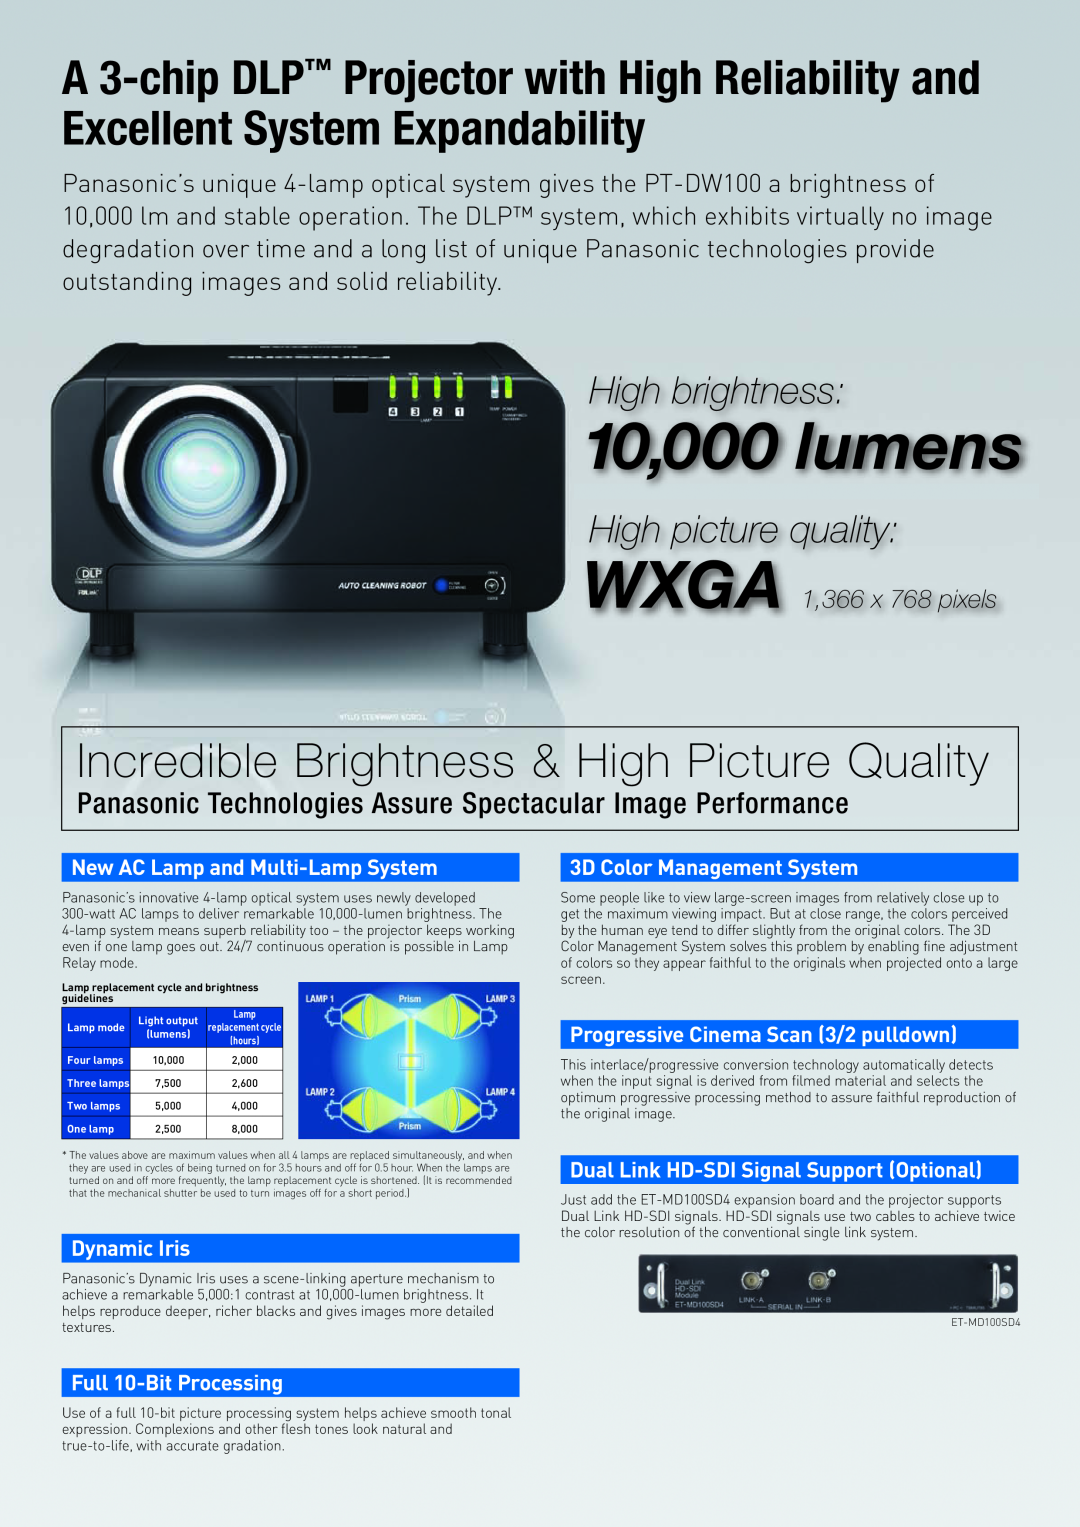 Panasonic PT-DW100 Incredible Brightness & High Picture Quality, New AC Lamp and Multi-Lamp System, Dynamic Iris 